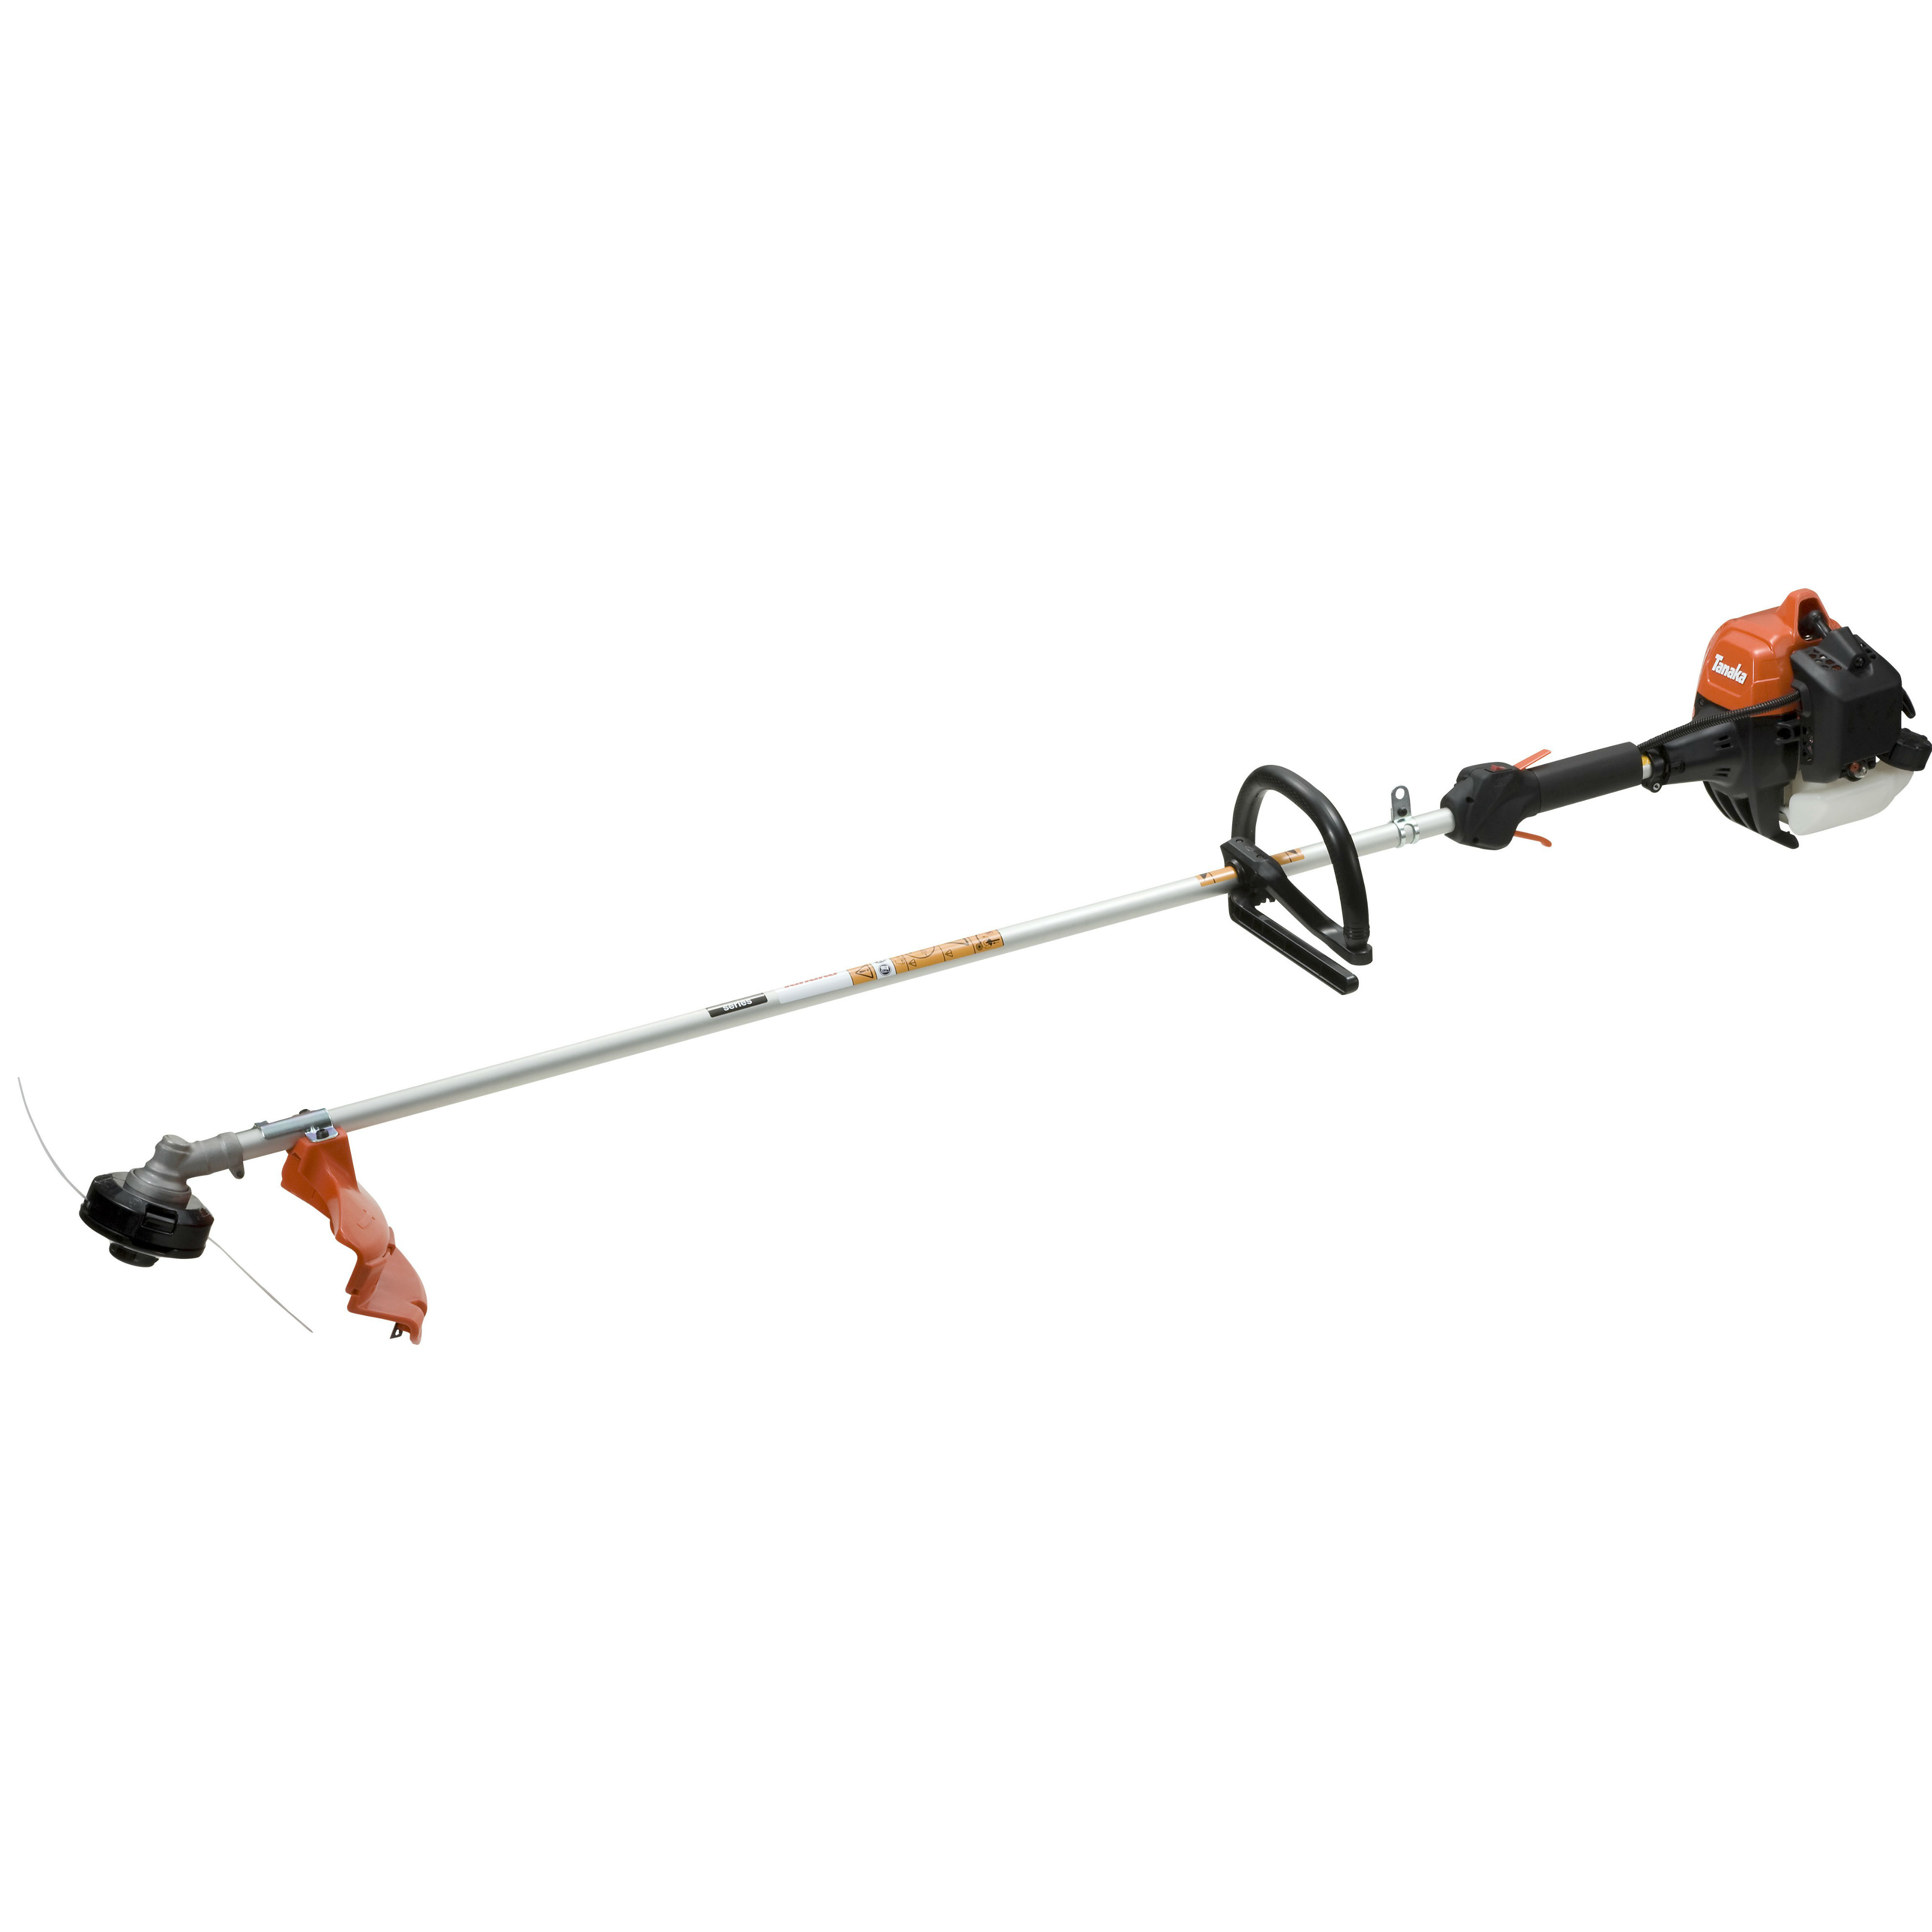 Tanaka TBC 2390 Line Trimmer Special Offer